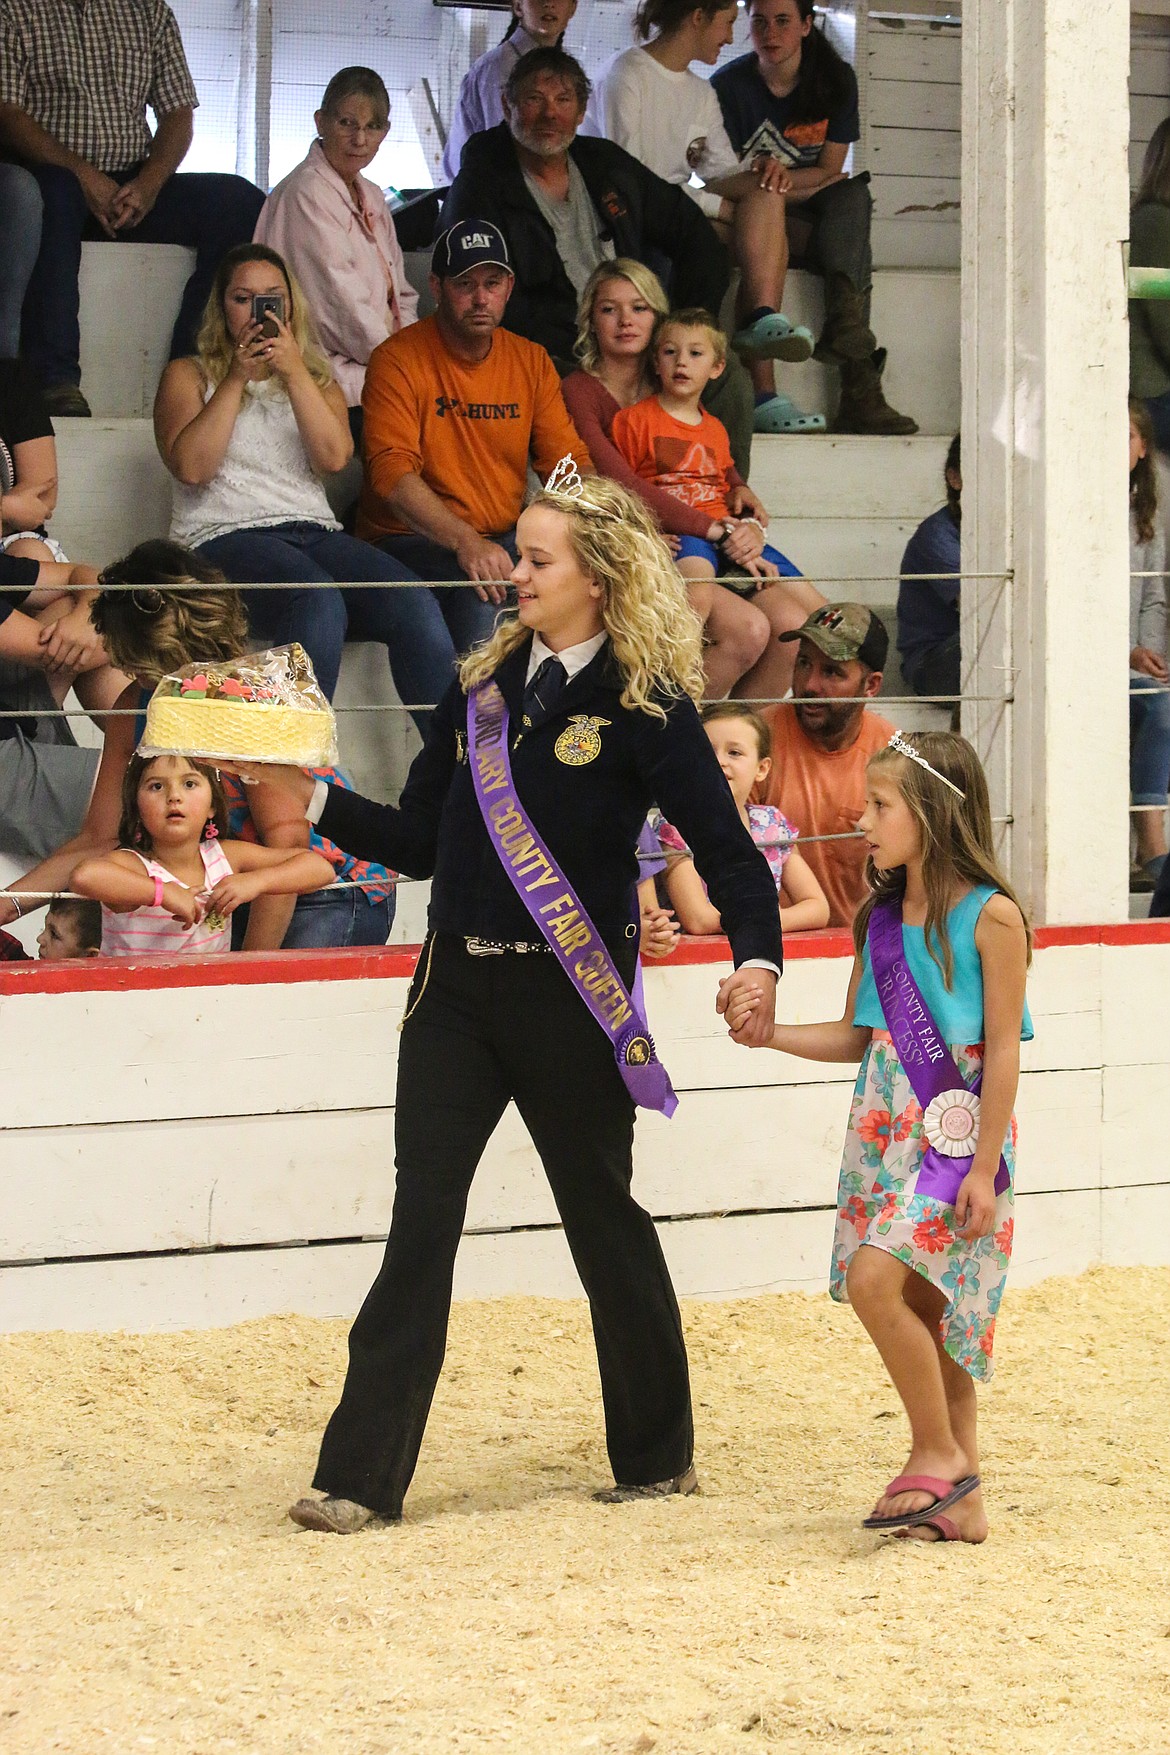 Princess Sydnee Blevins showcases a cake during the bake sale that was won twice, finding its home with Caleb Davis.